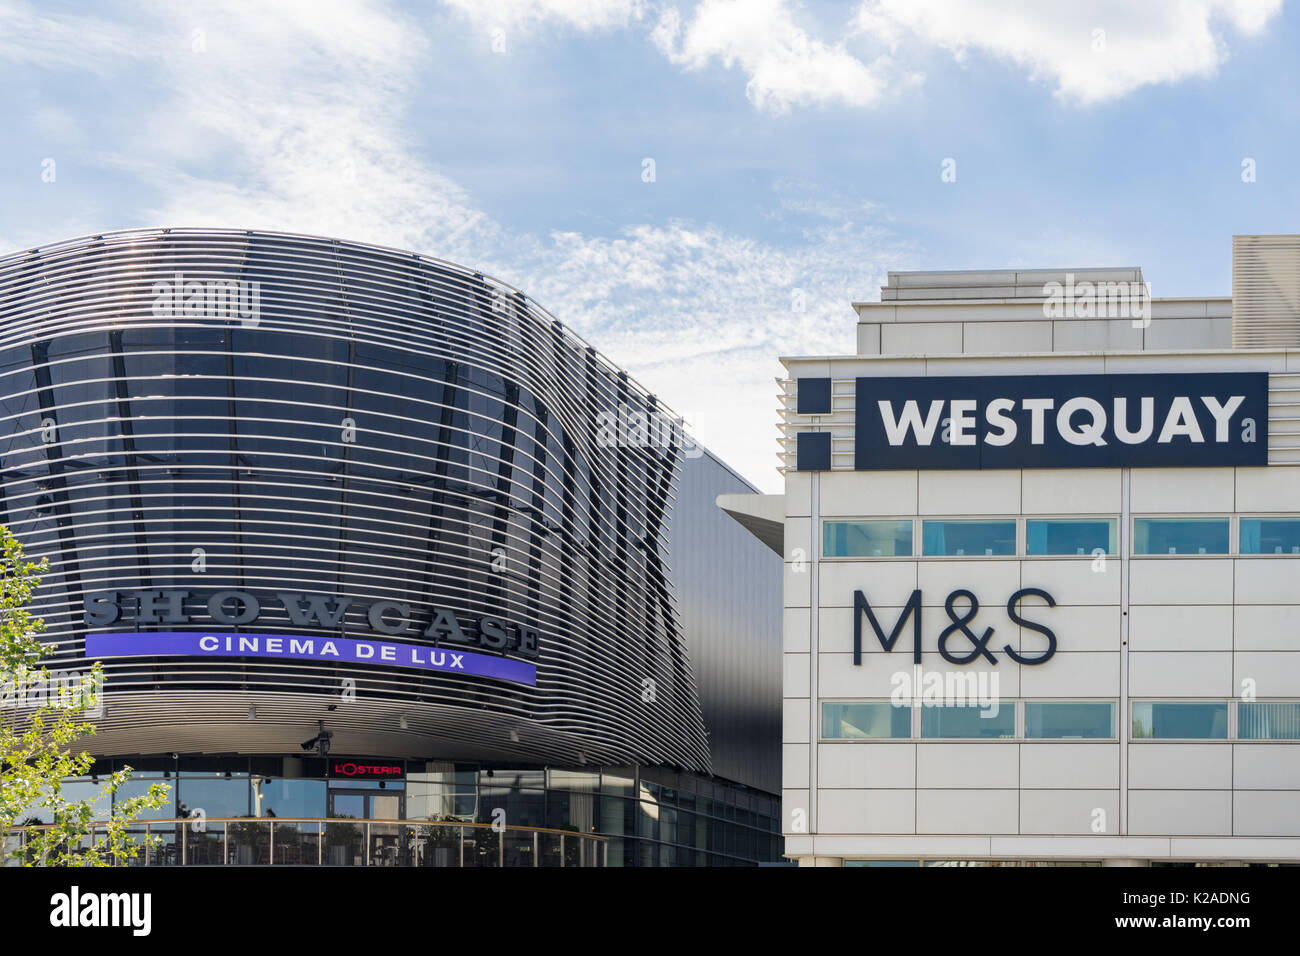 Contrasting architecture between the old and the new extension to WestQuay shopping centre, dining and leisure complex in Southampton in 2017, UK Stock Photo